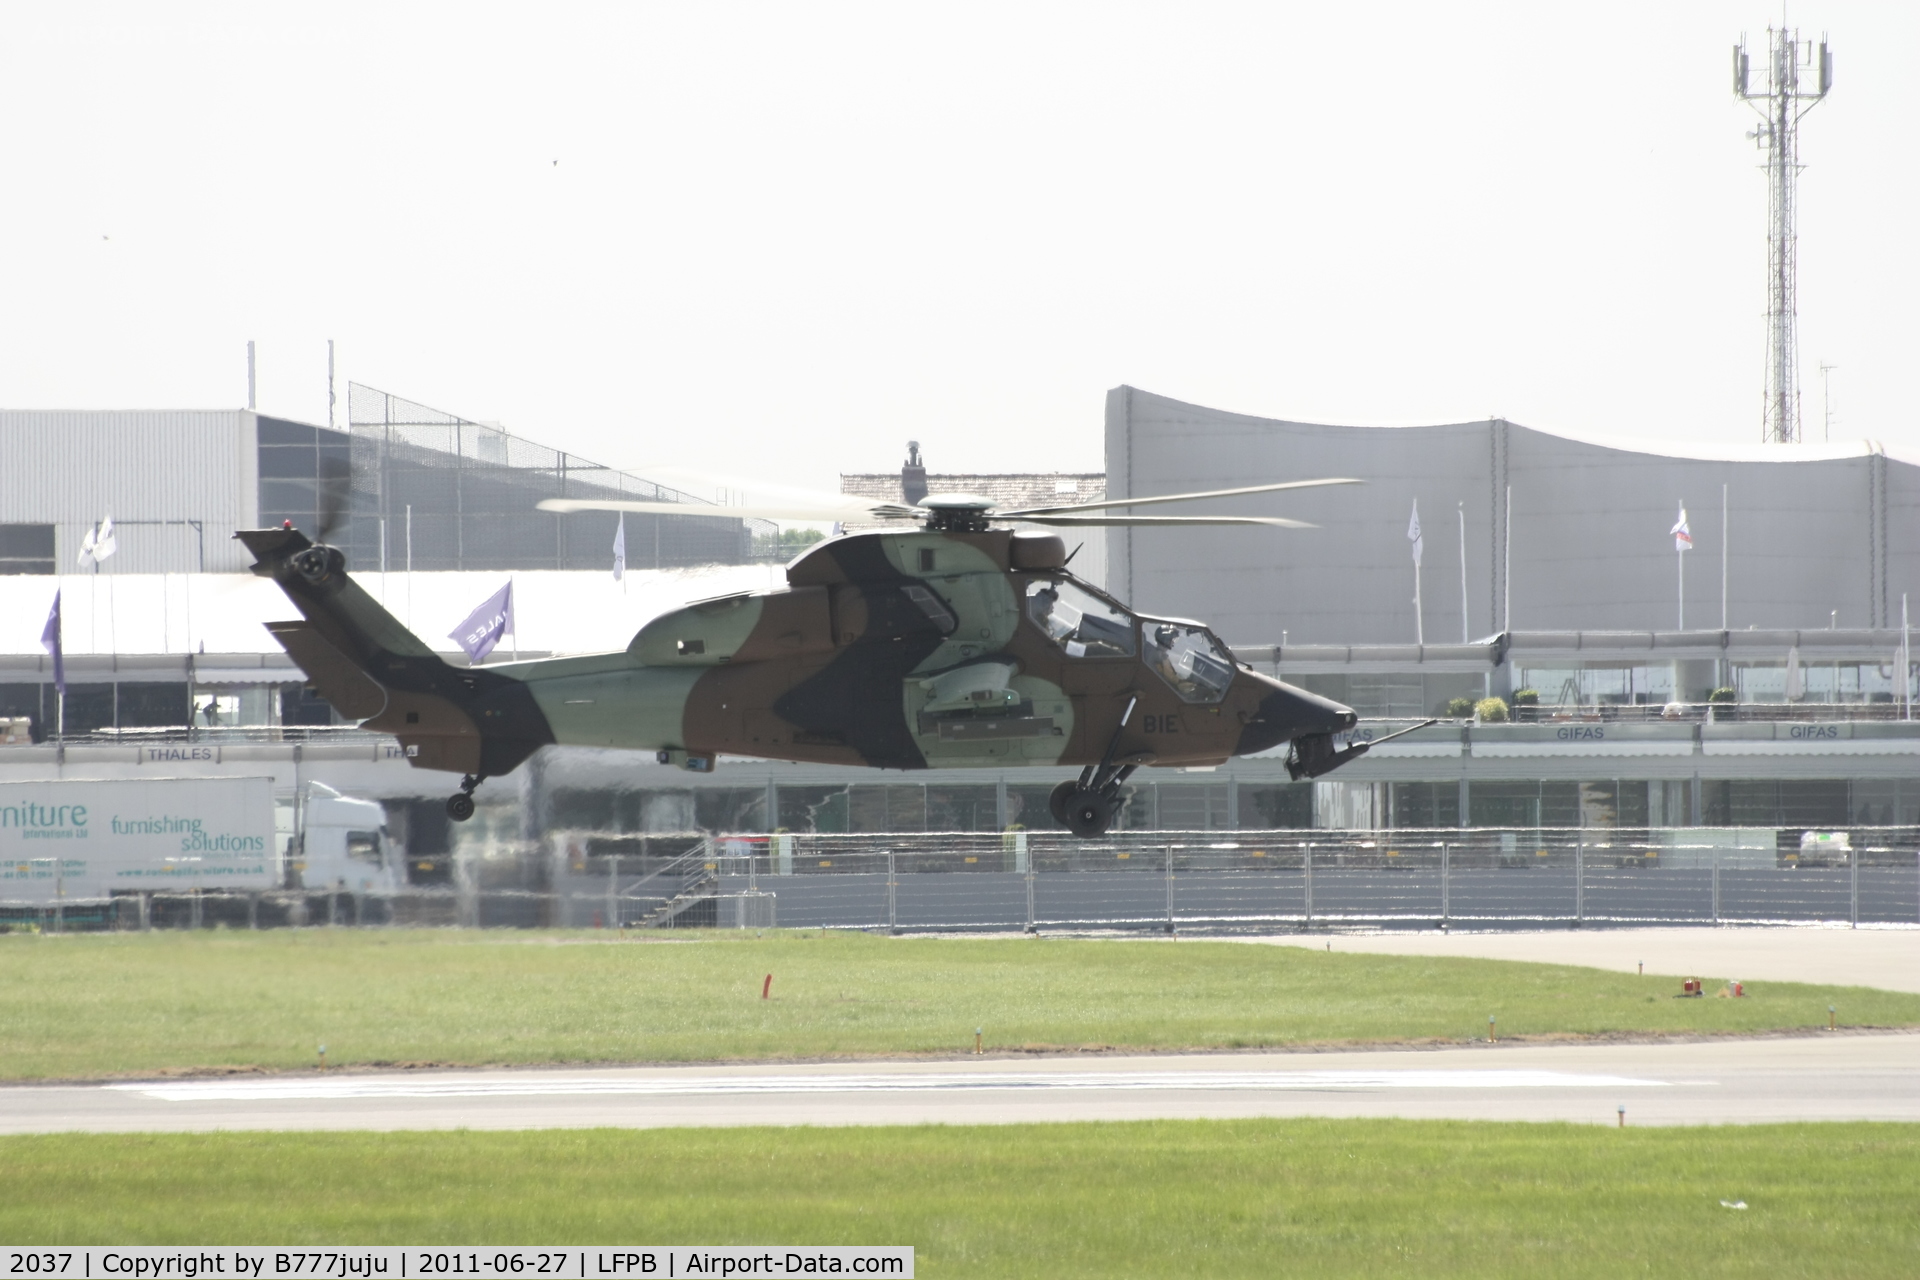 2037, Eurocopter EC-665 Tigre HAP C/N 2037, on dispaly at SIAE 2011